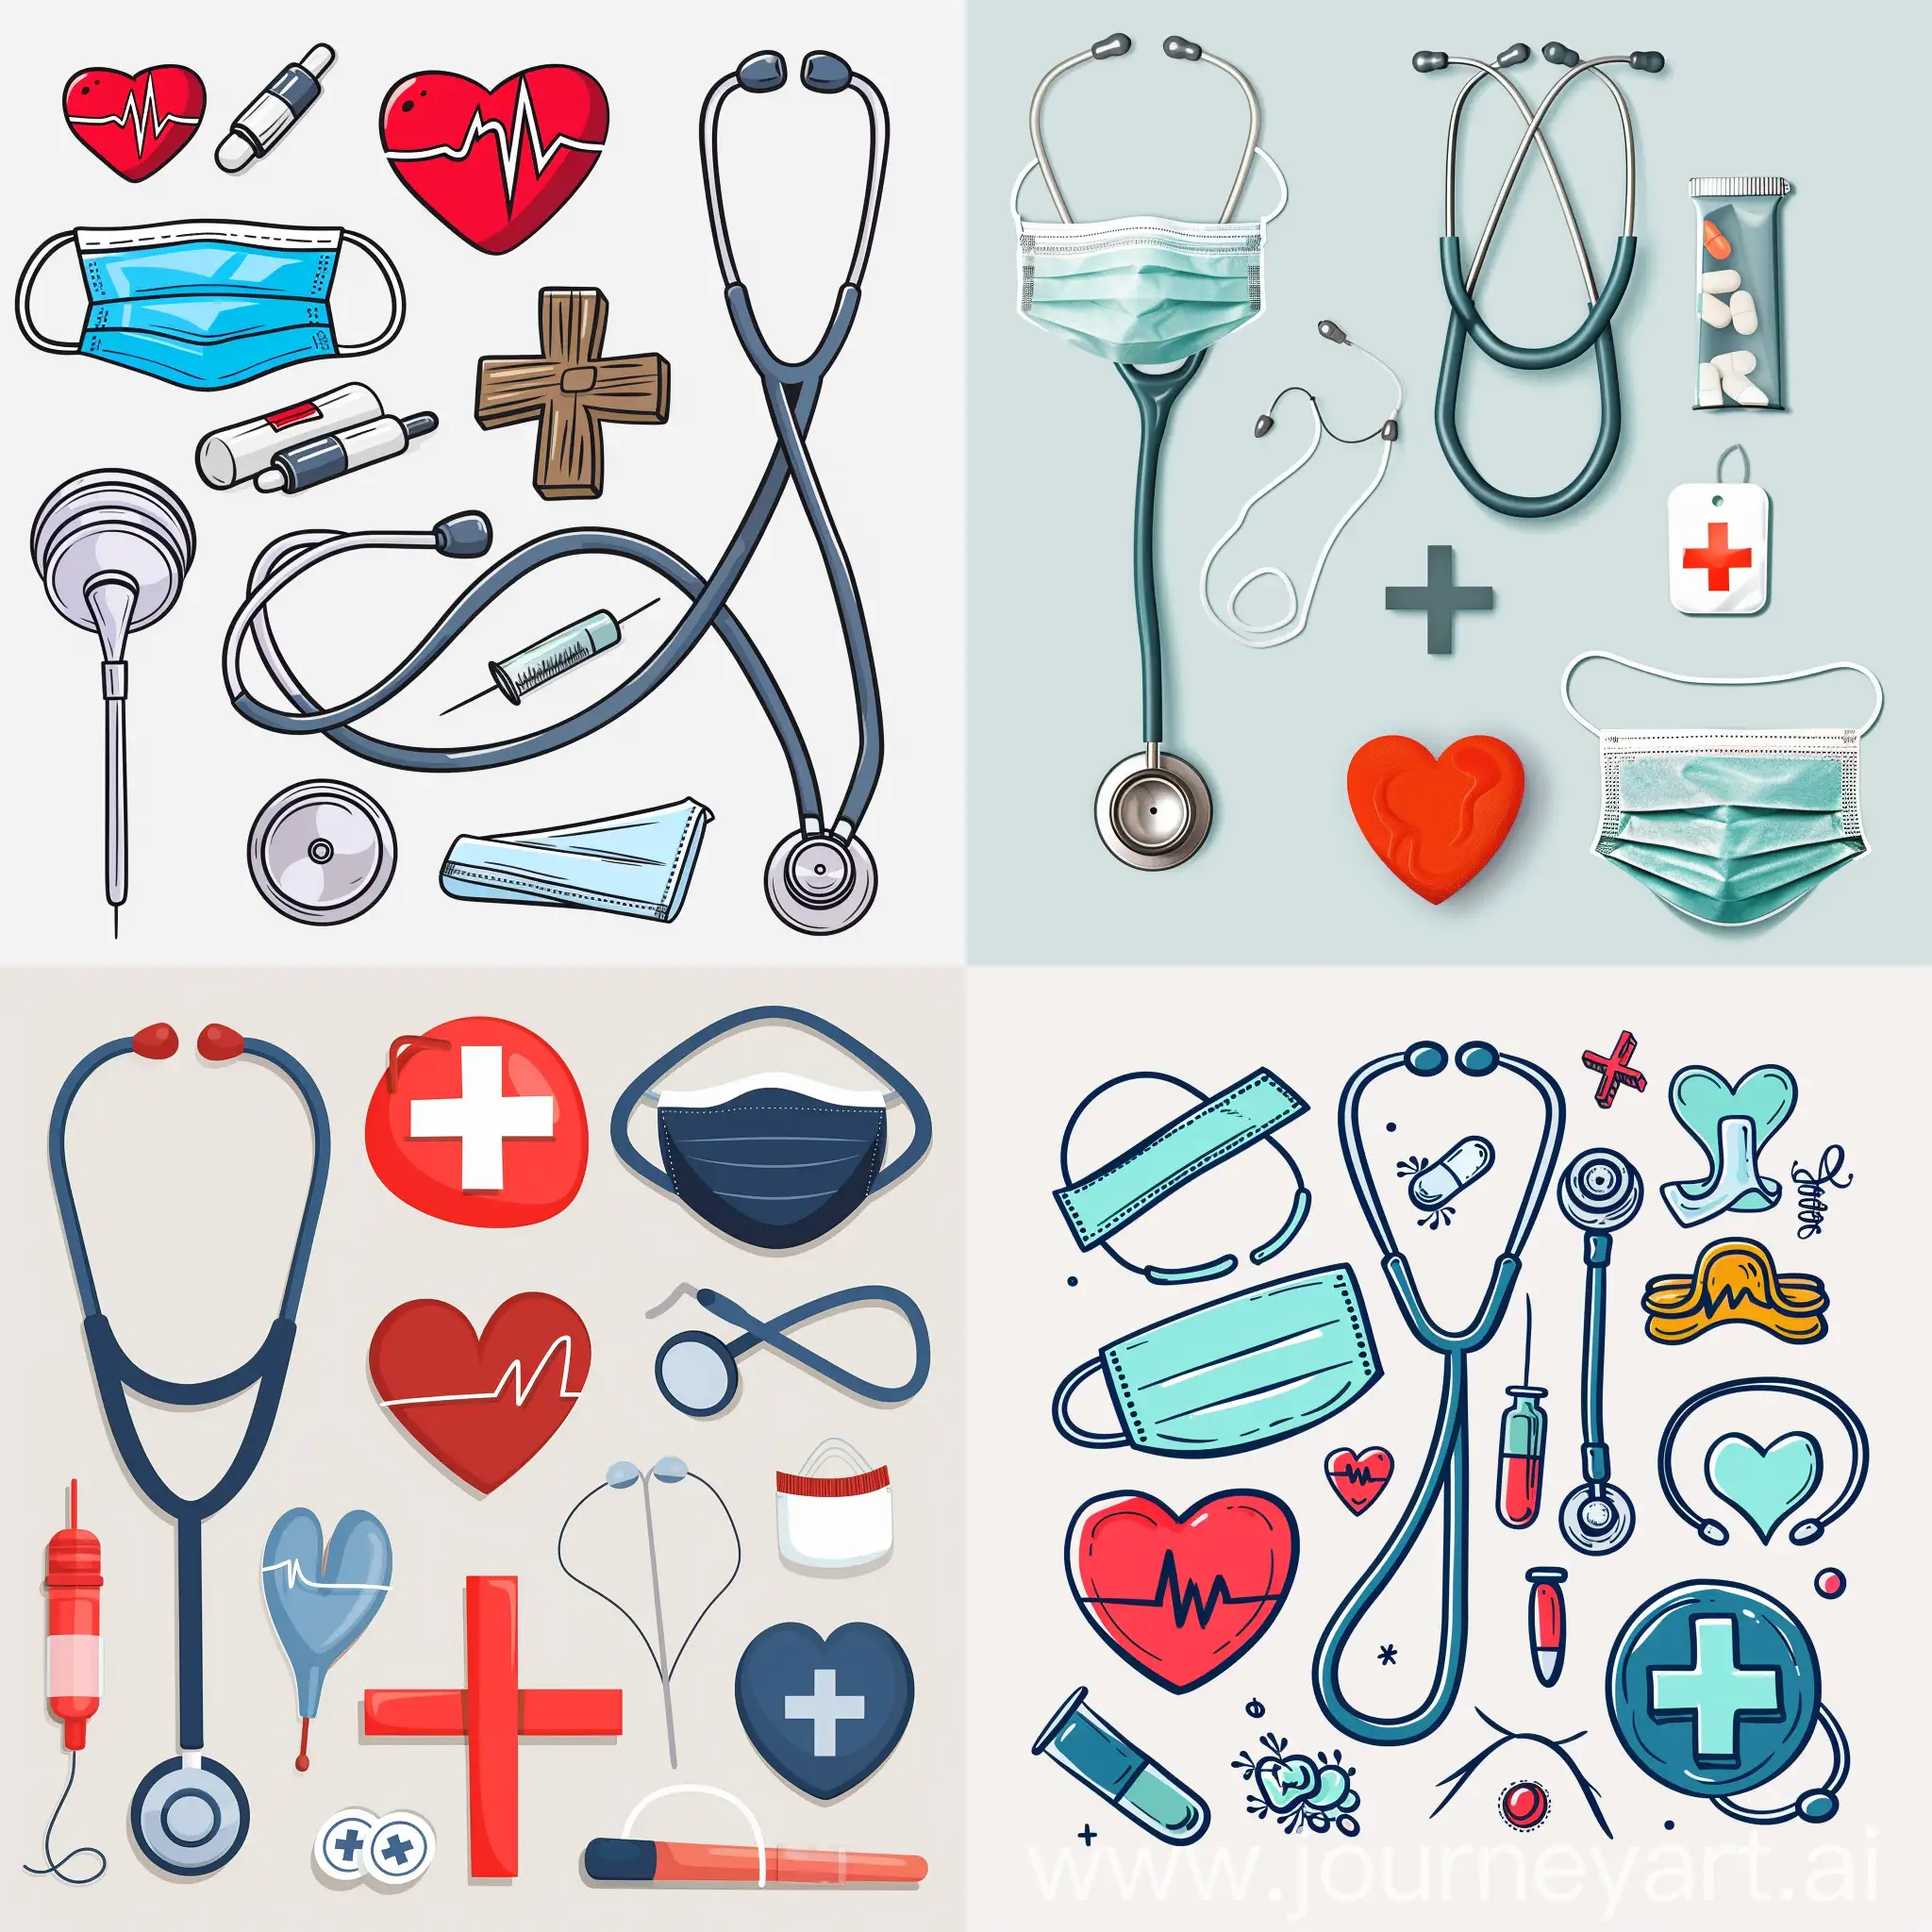 Medical-Supplies-and-Heart-with-Stethoscope-Illustration